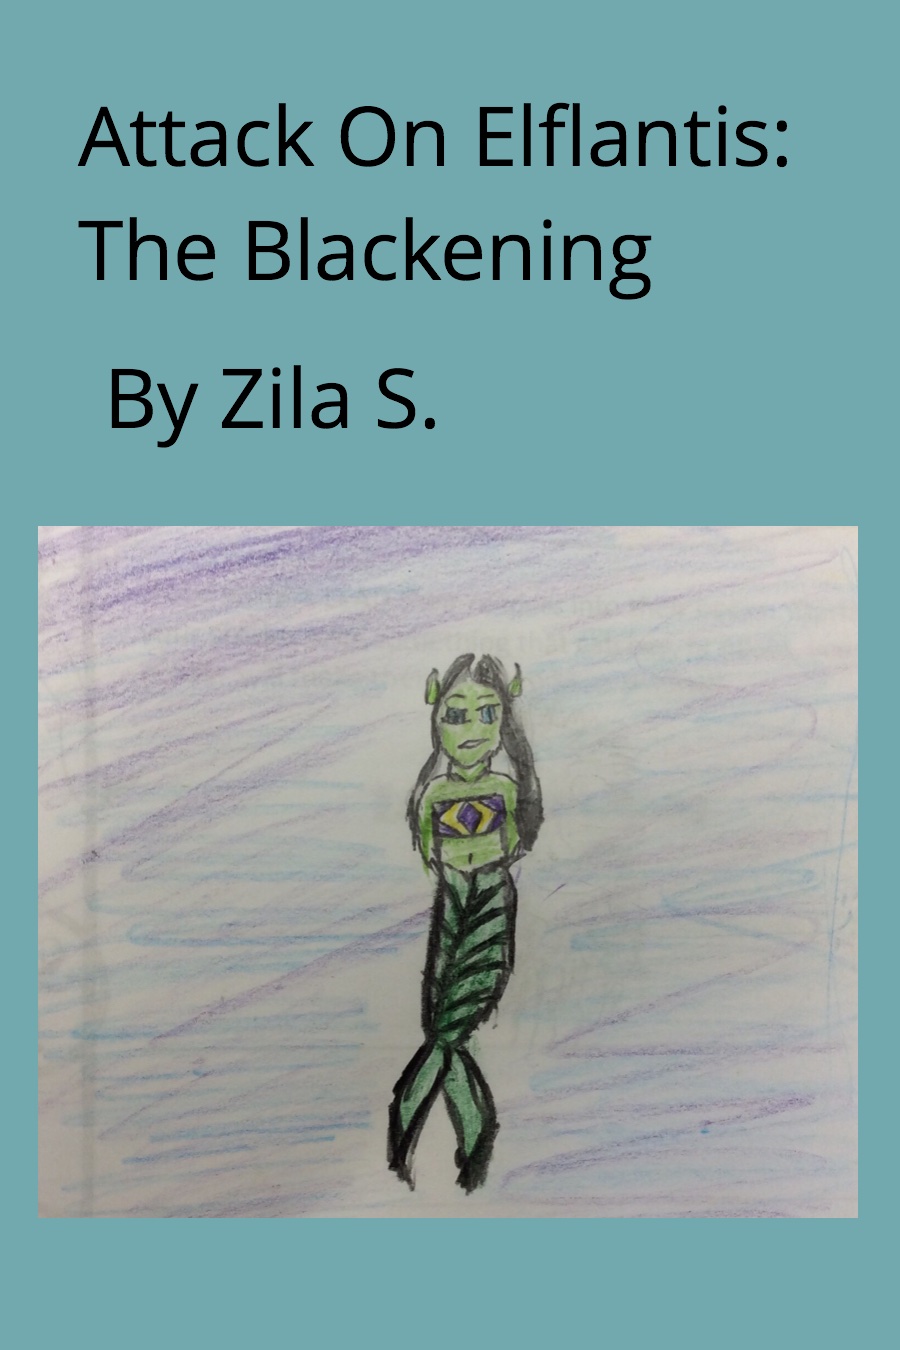 Attack on Elflantis: The Blackening by Zila S